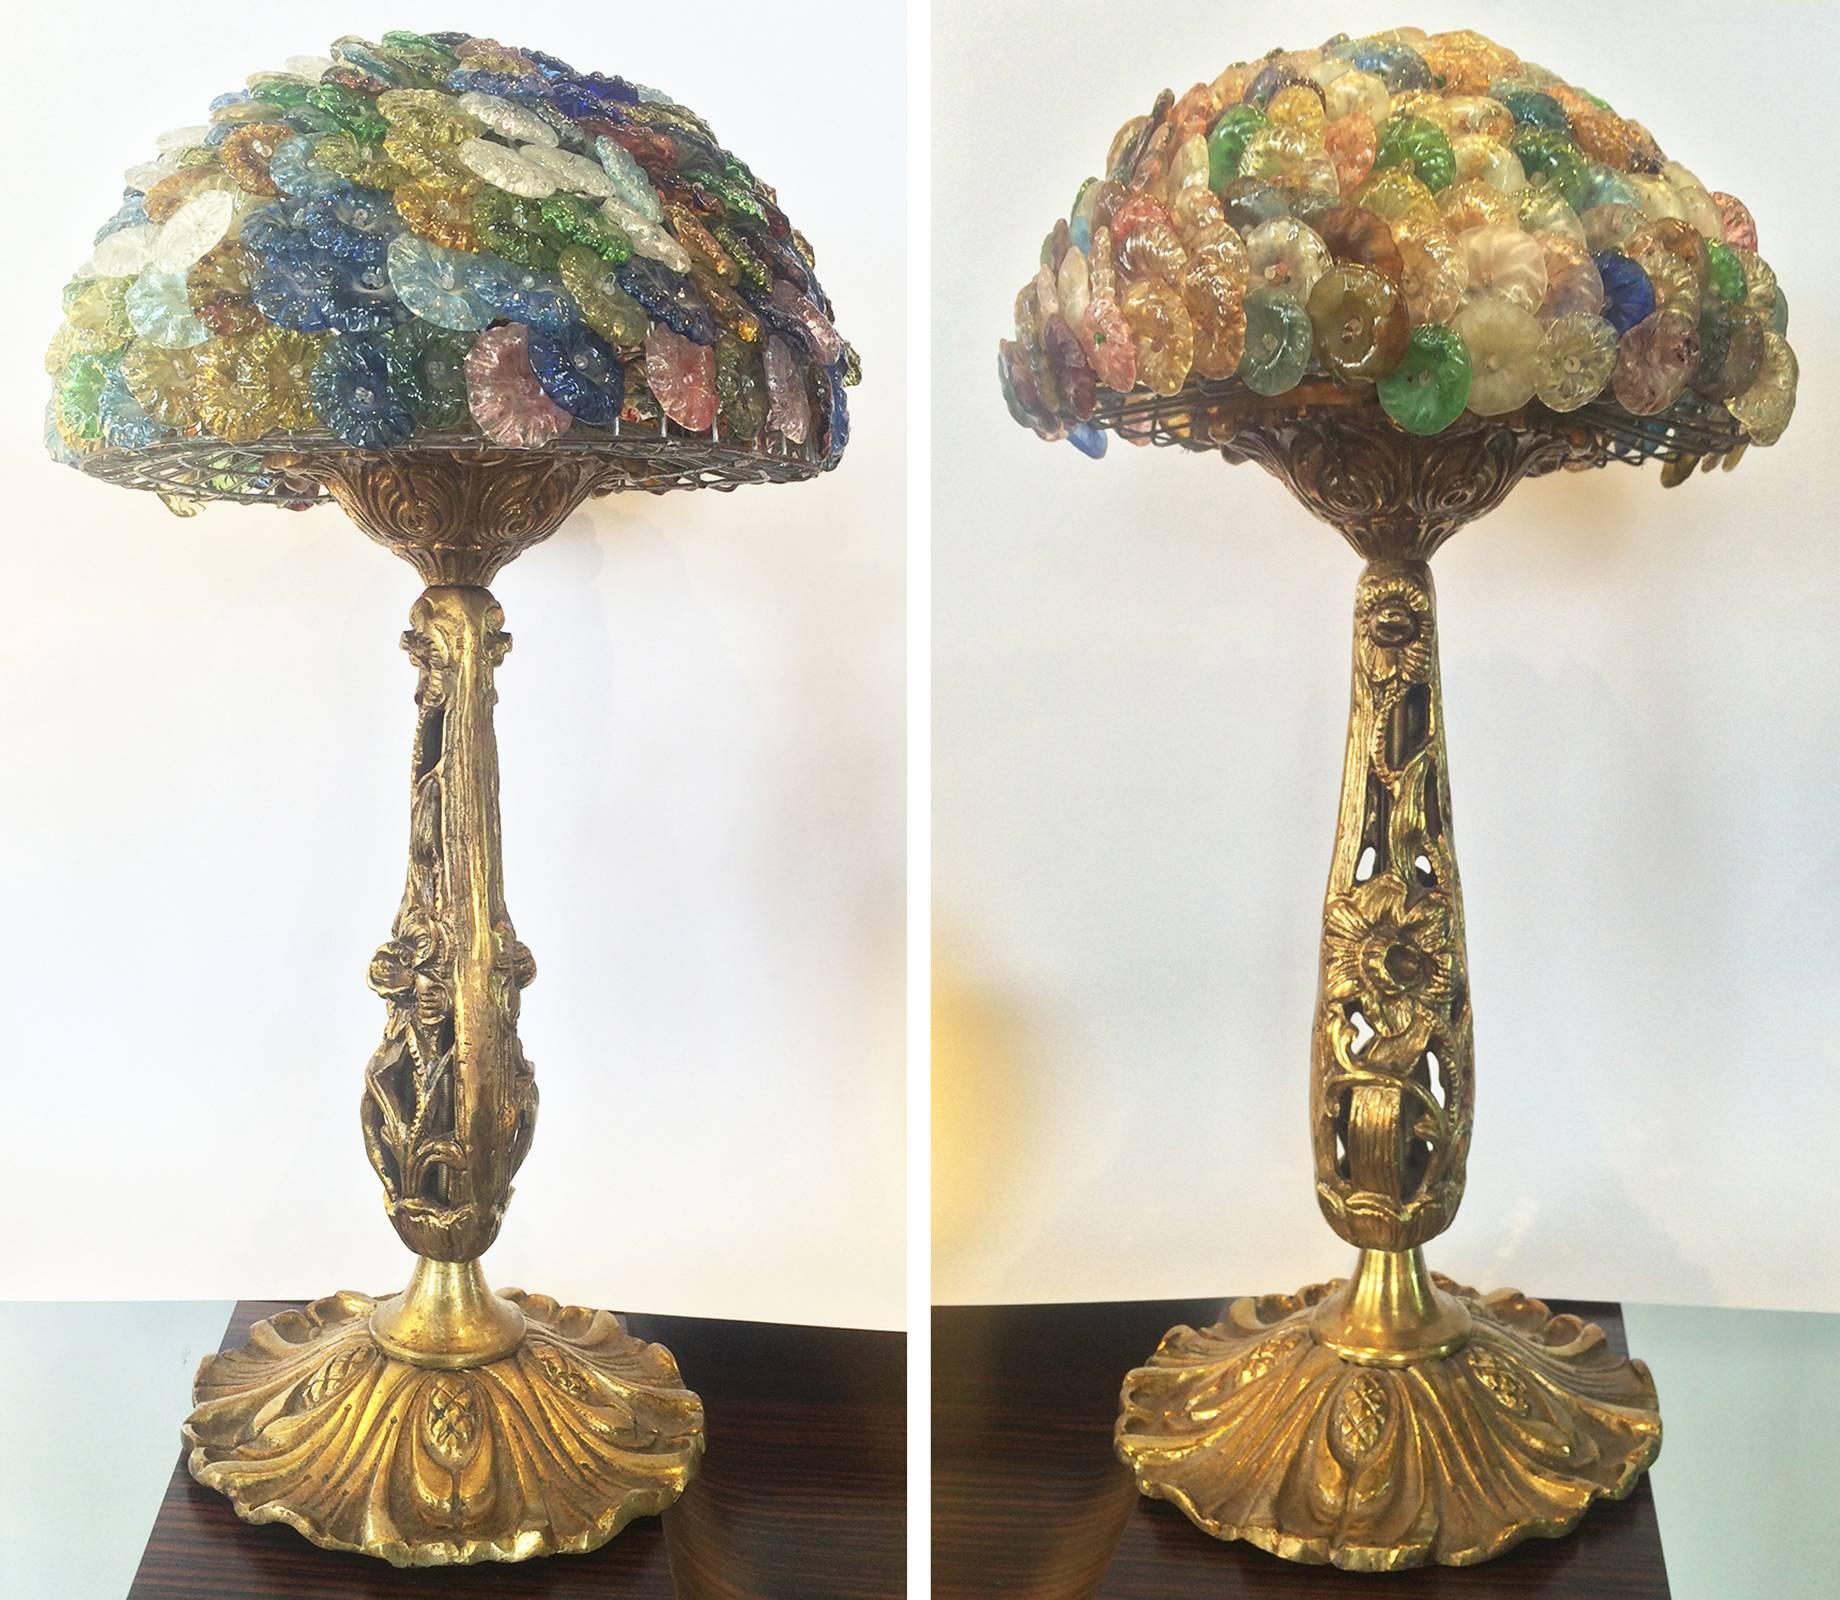 Art Deco lamps, amazing pair, “Tree Trunks” in bronze, filigree with flowers and vines up the trunk, and pine cones and needles at foot. Many Czech Art glass blossom/flowers at crown. The hundreds of handmade glass decorations, are tied to a metal